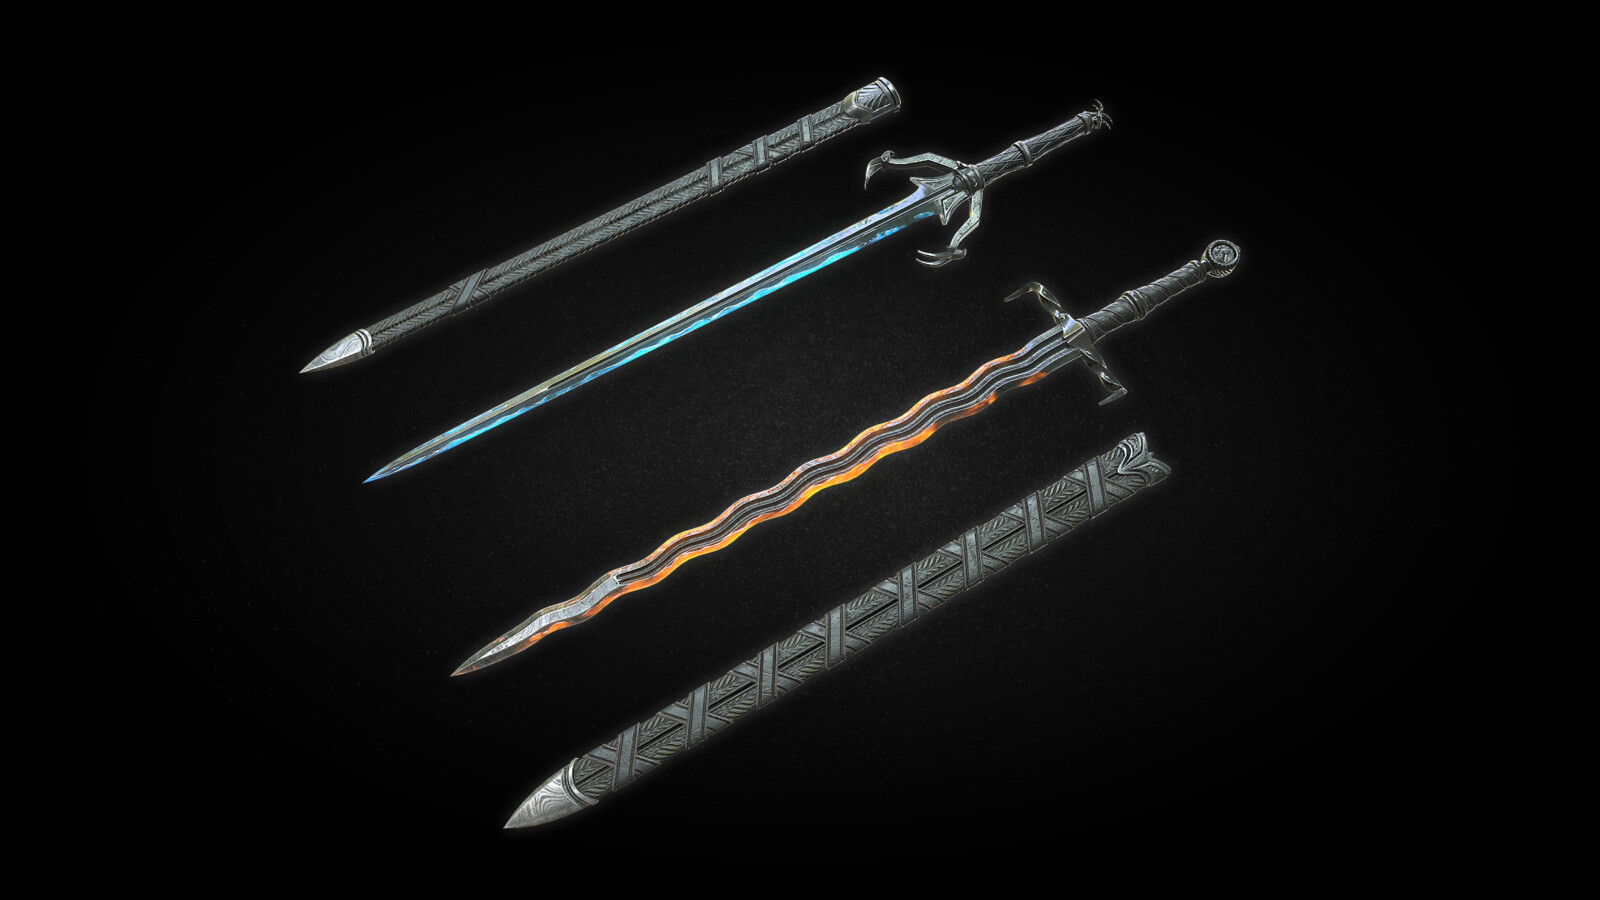 The witcher 3 e3 swords фото 94